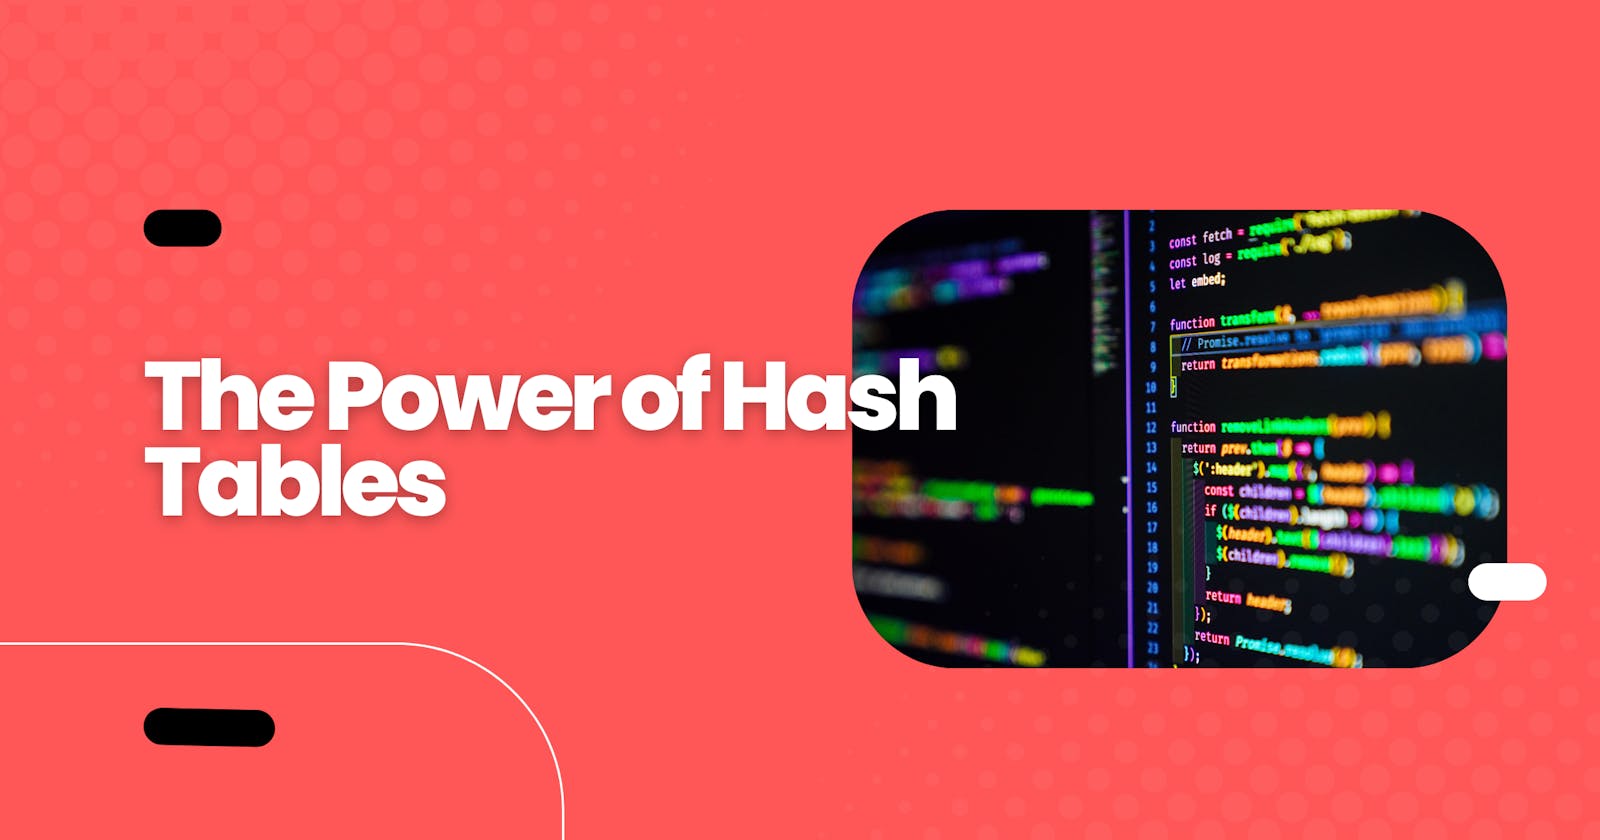 The Power of Hash Tables